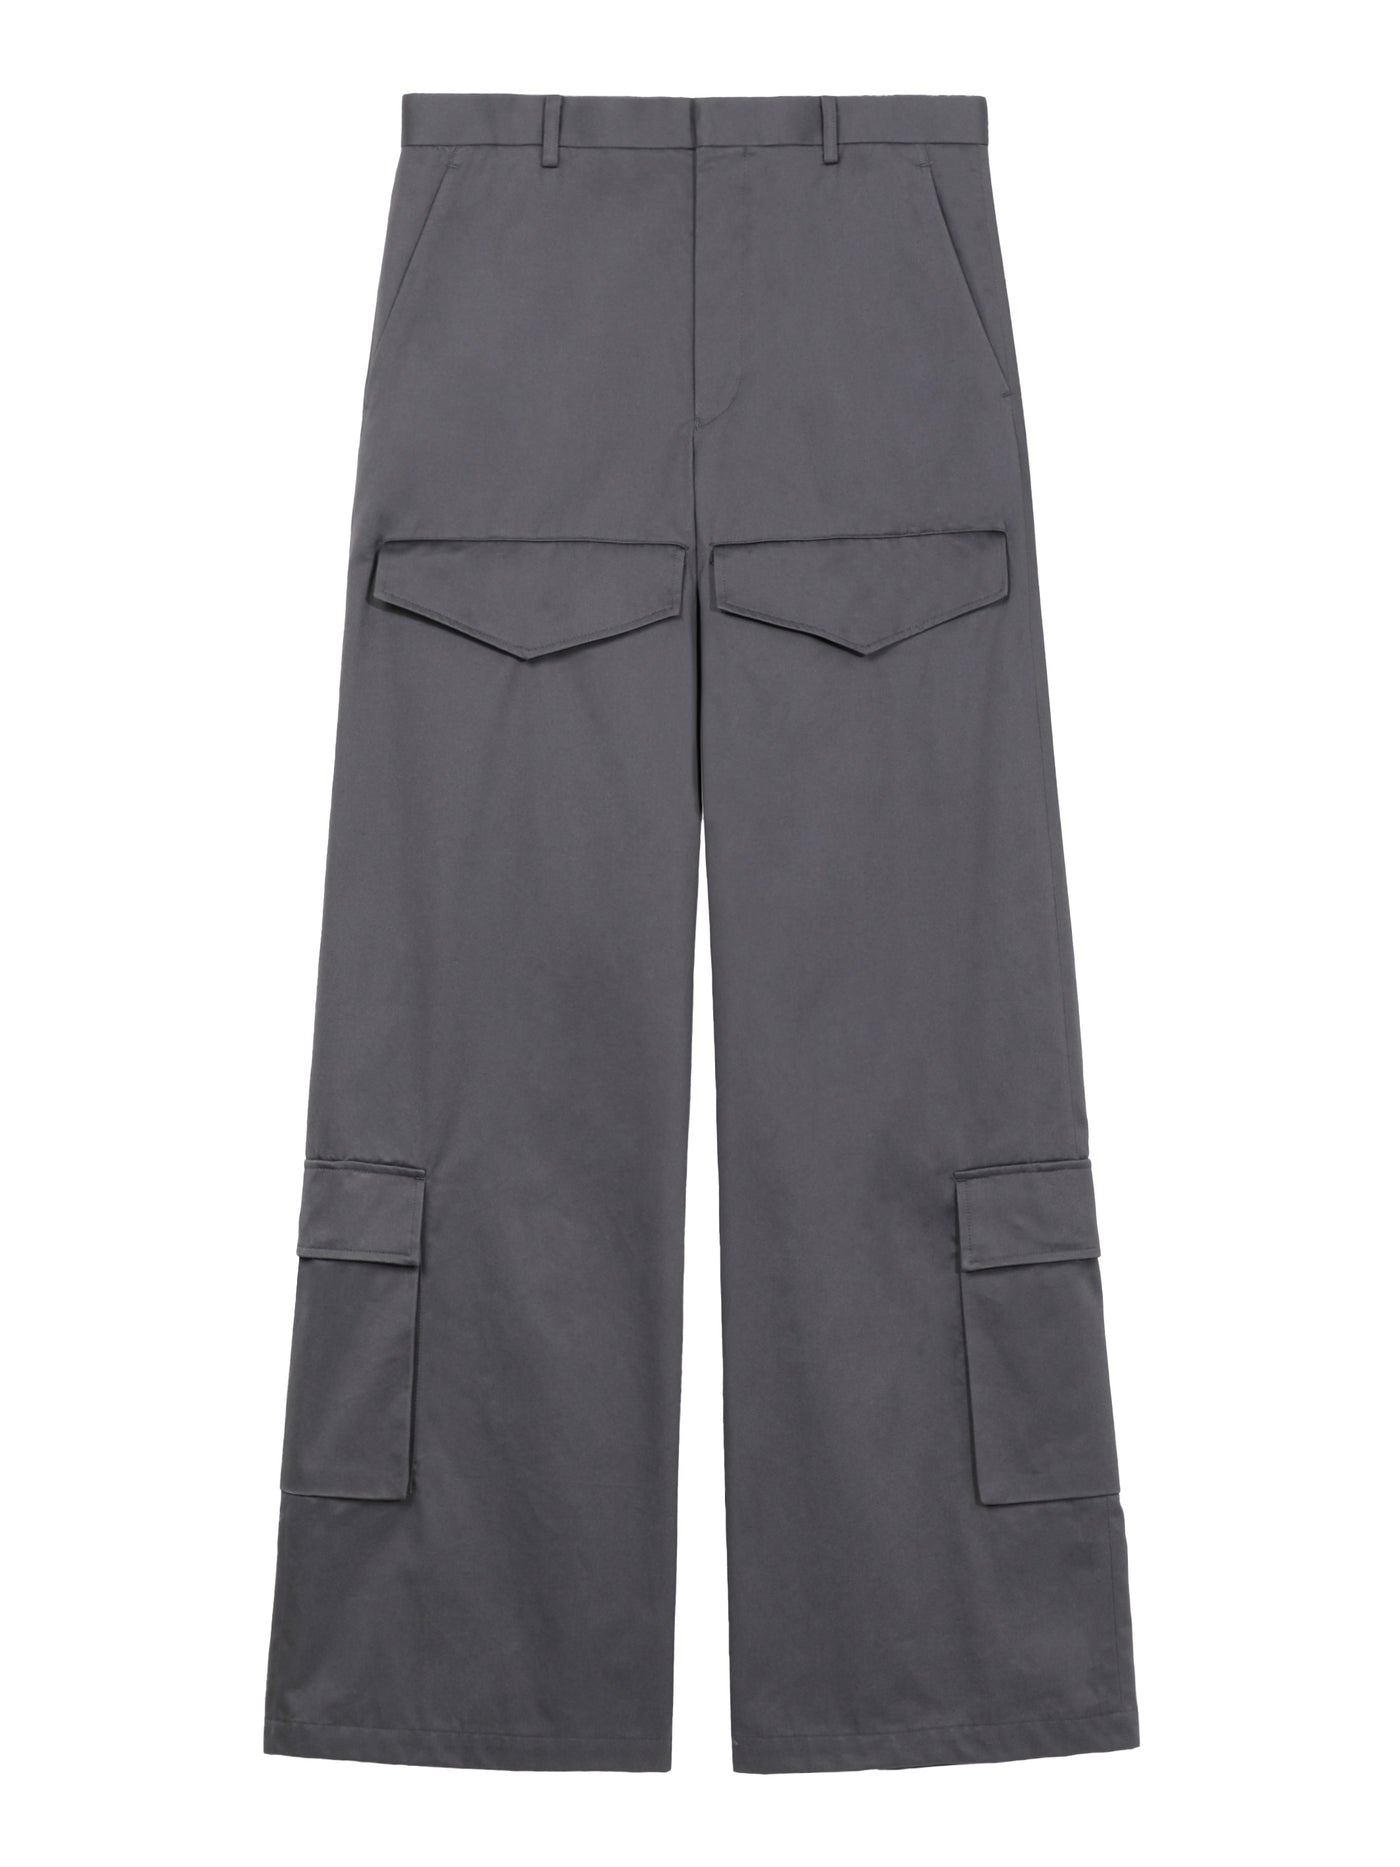 Cotton twill wide cargo pants